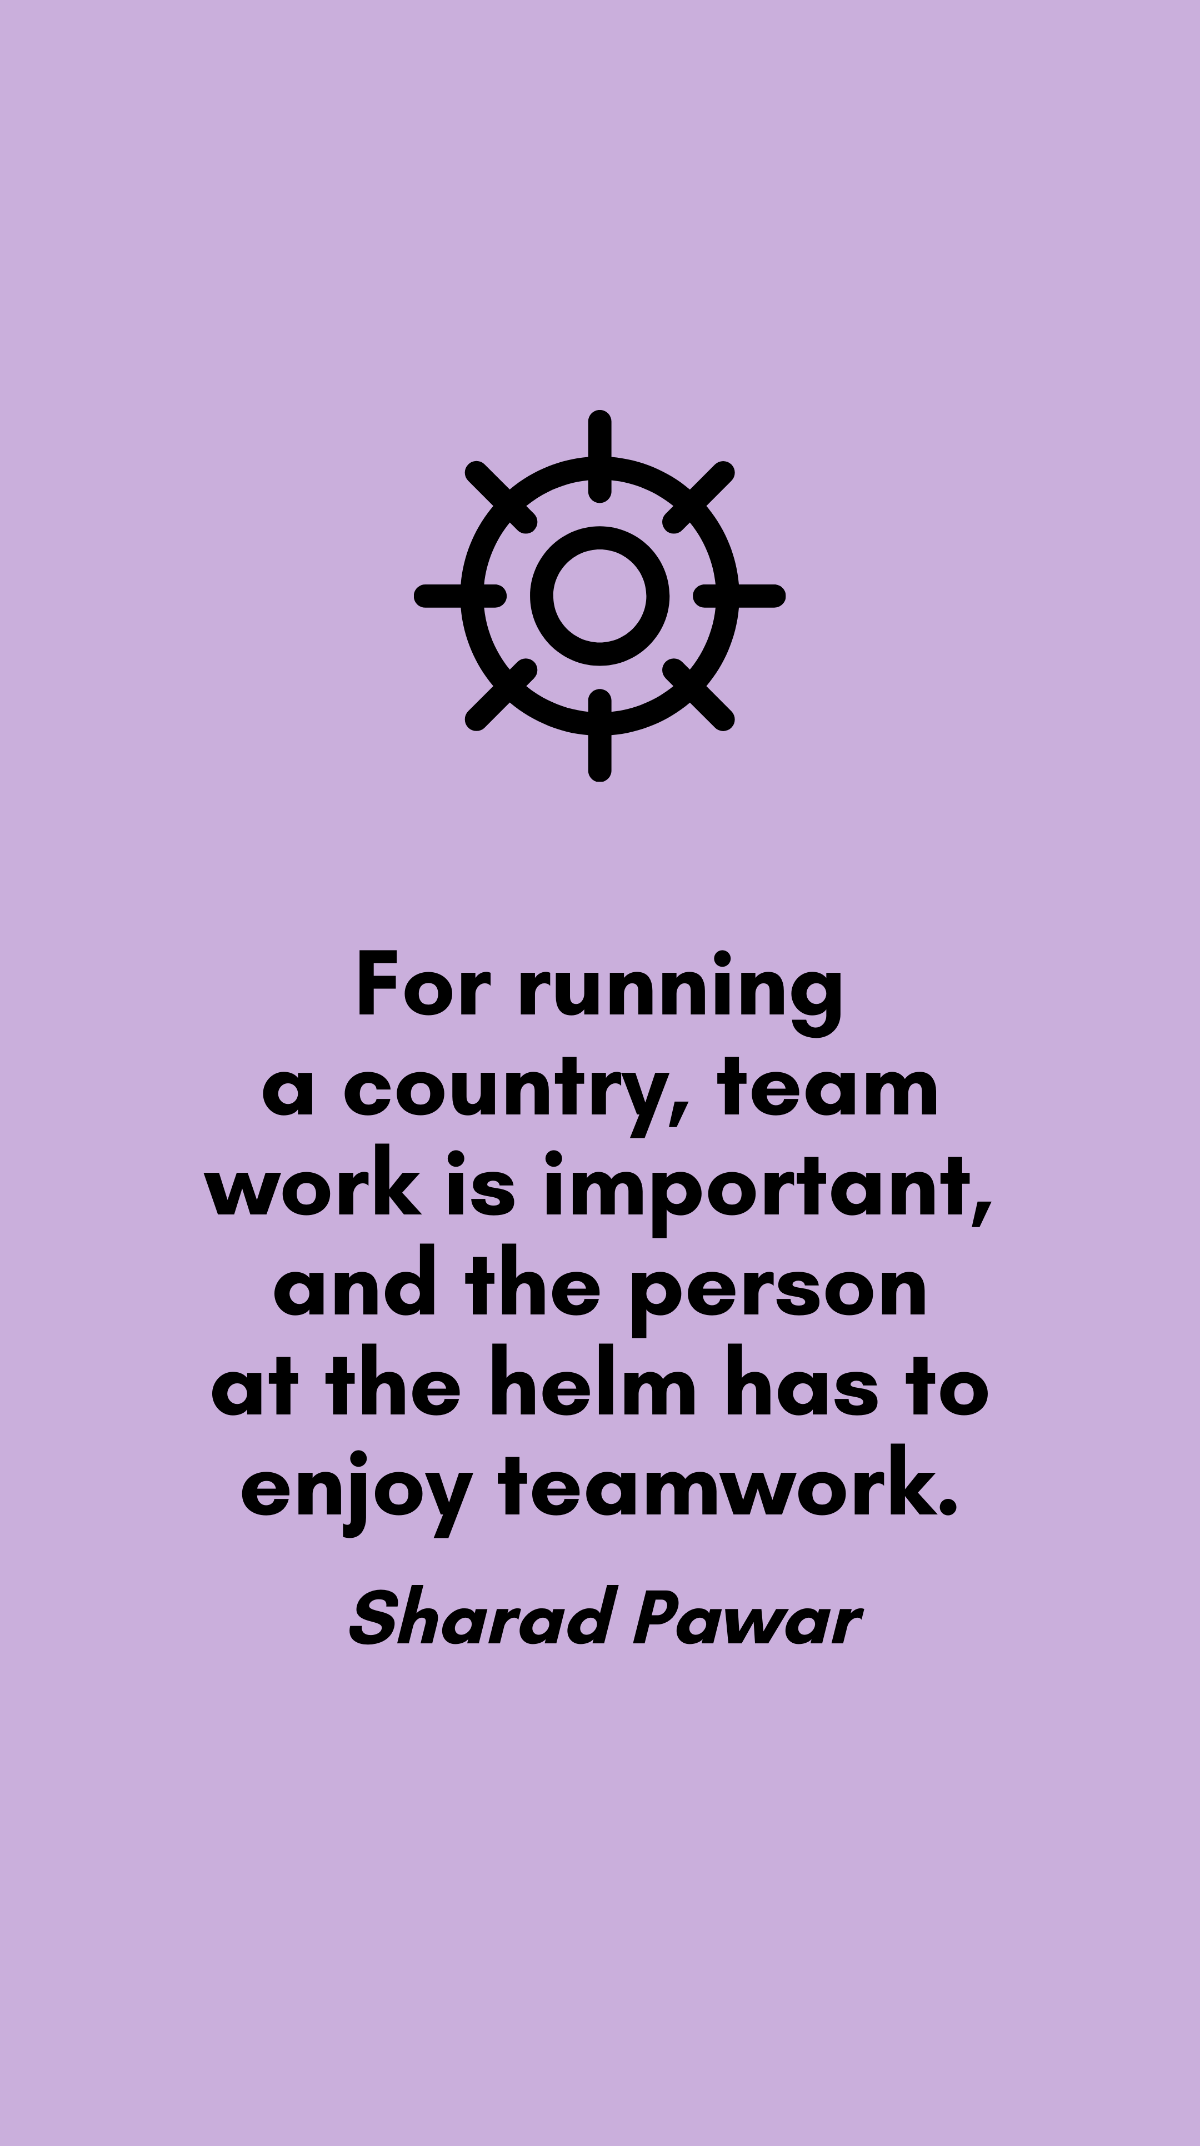 Free Sharad Pawar - For running a country, team work is important, and the person at the helm has to enjoy teamwork. Template